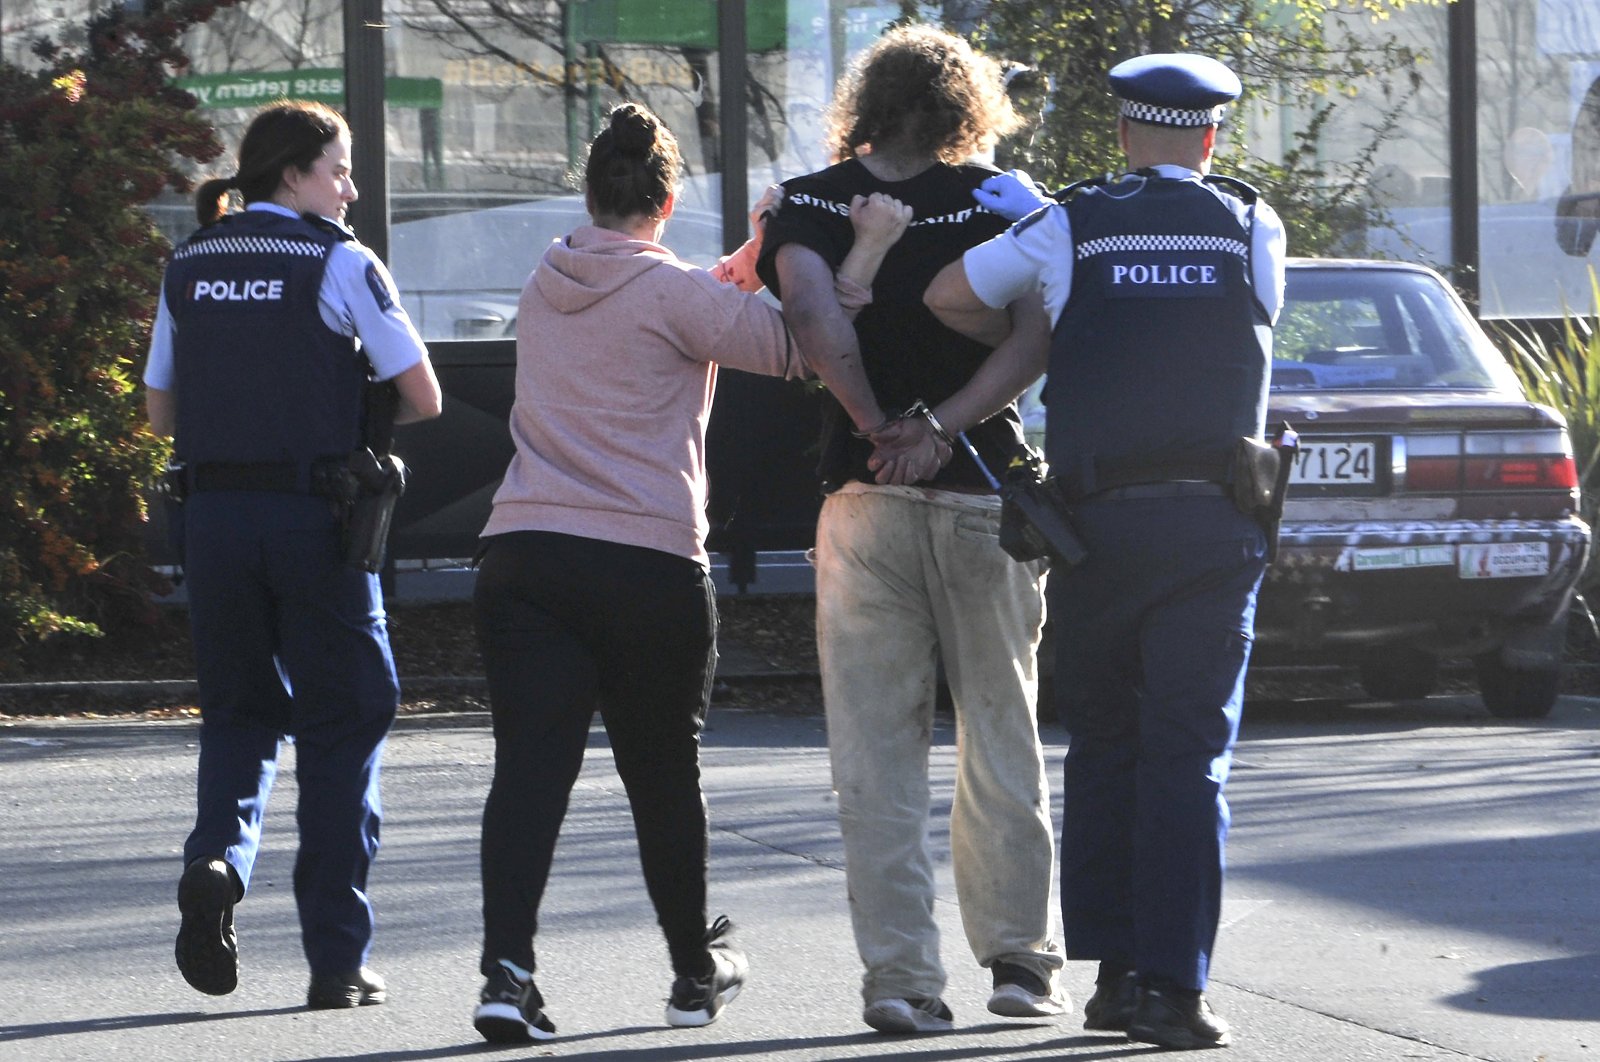 Police take a suspect into custody near the Countdown supermarket in central Dunedin, New Zealand, May 10, 2021. (AP Photo)